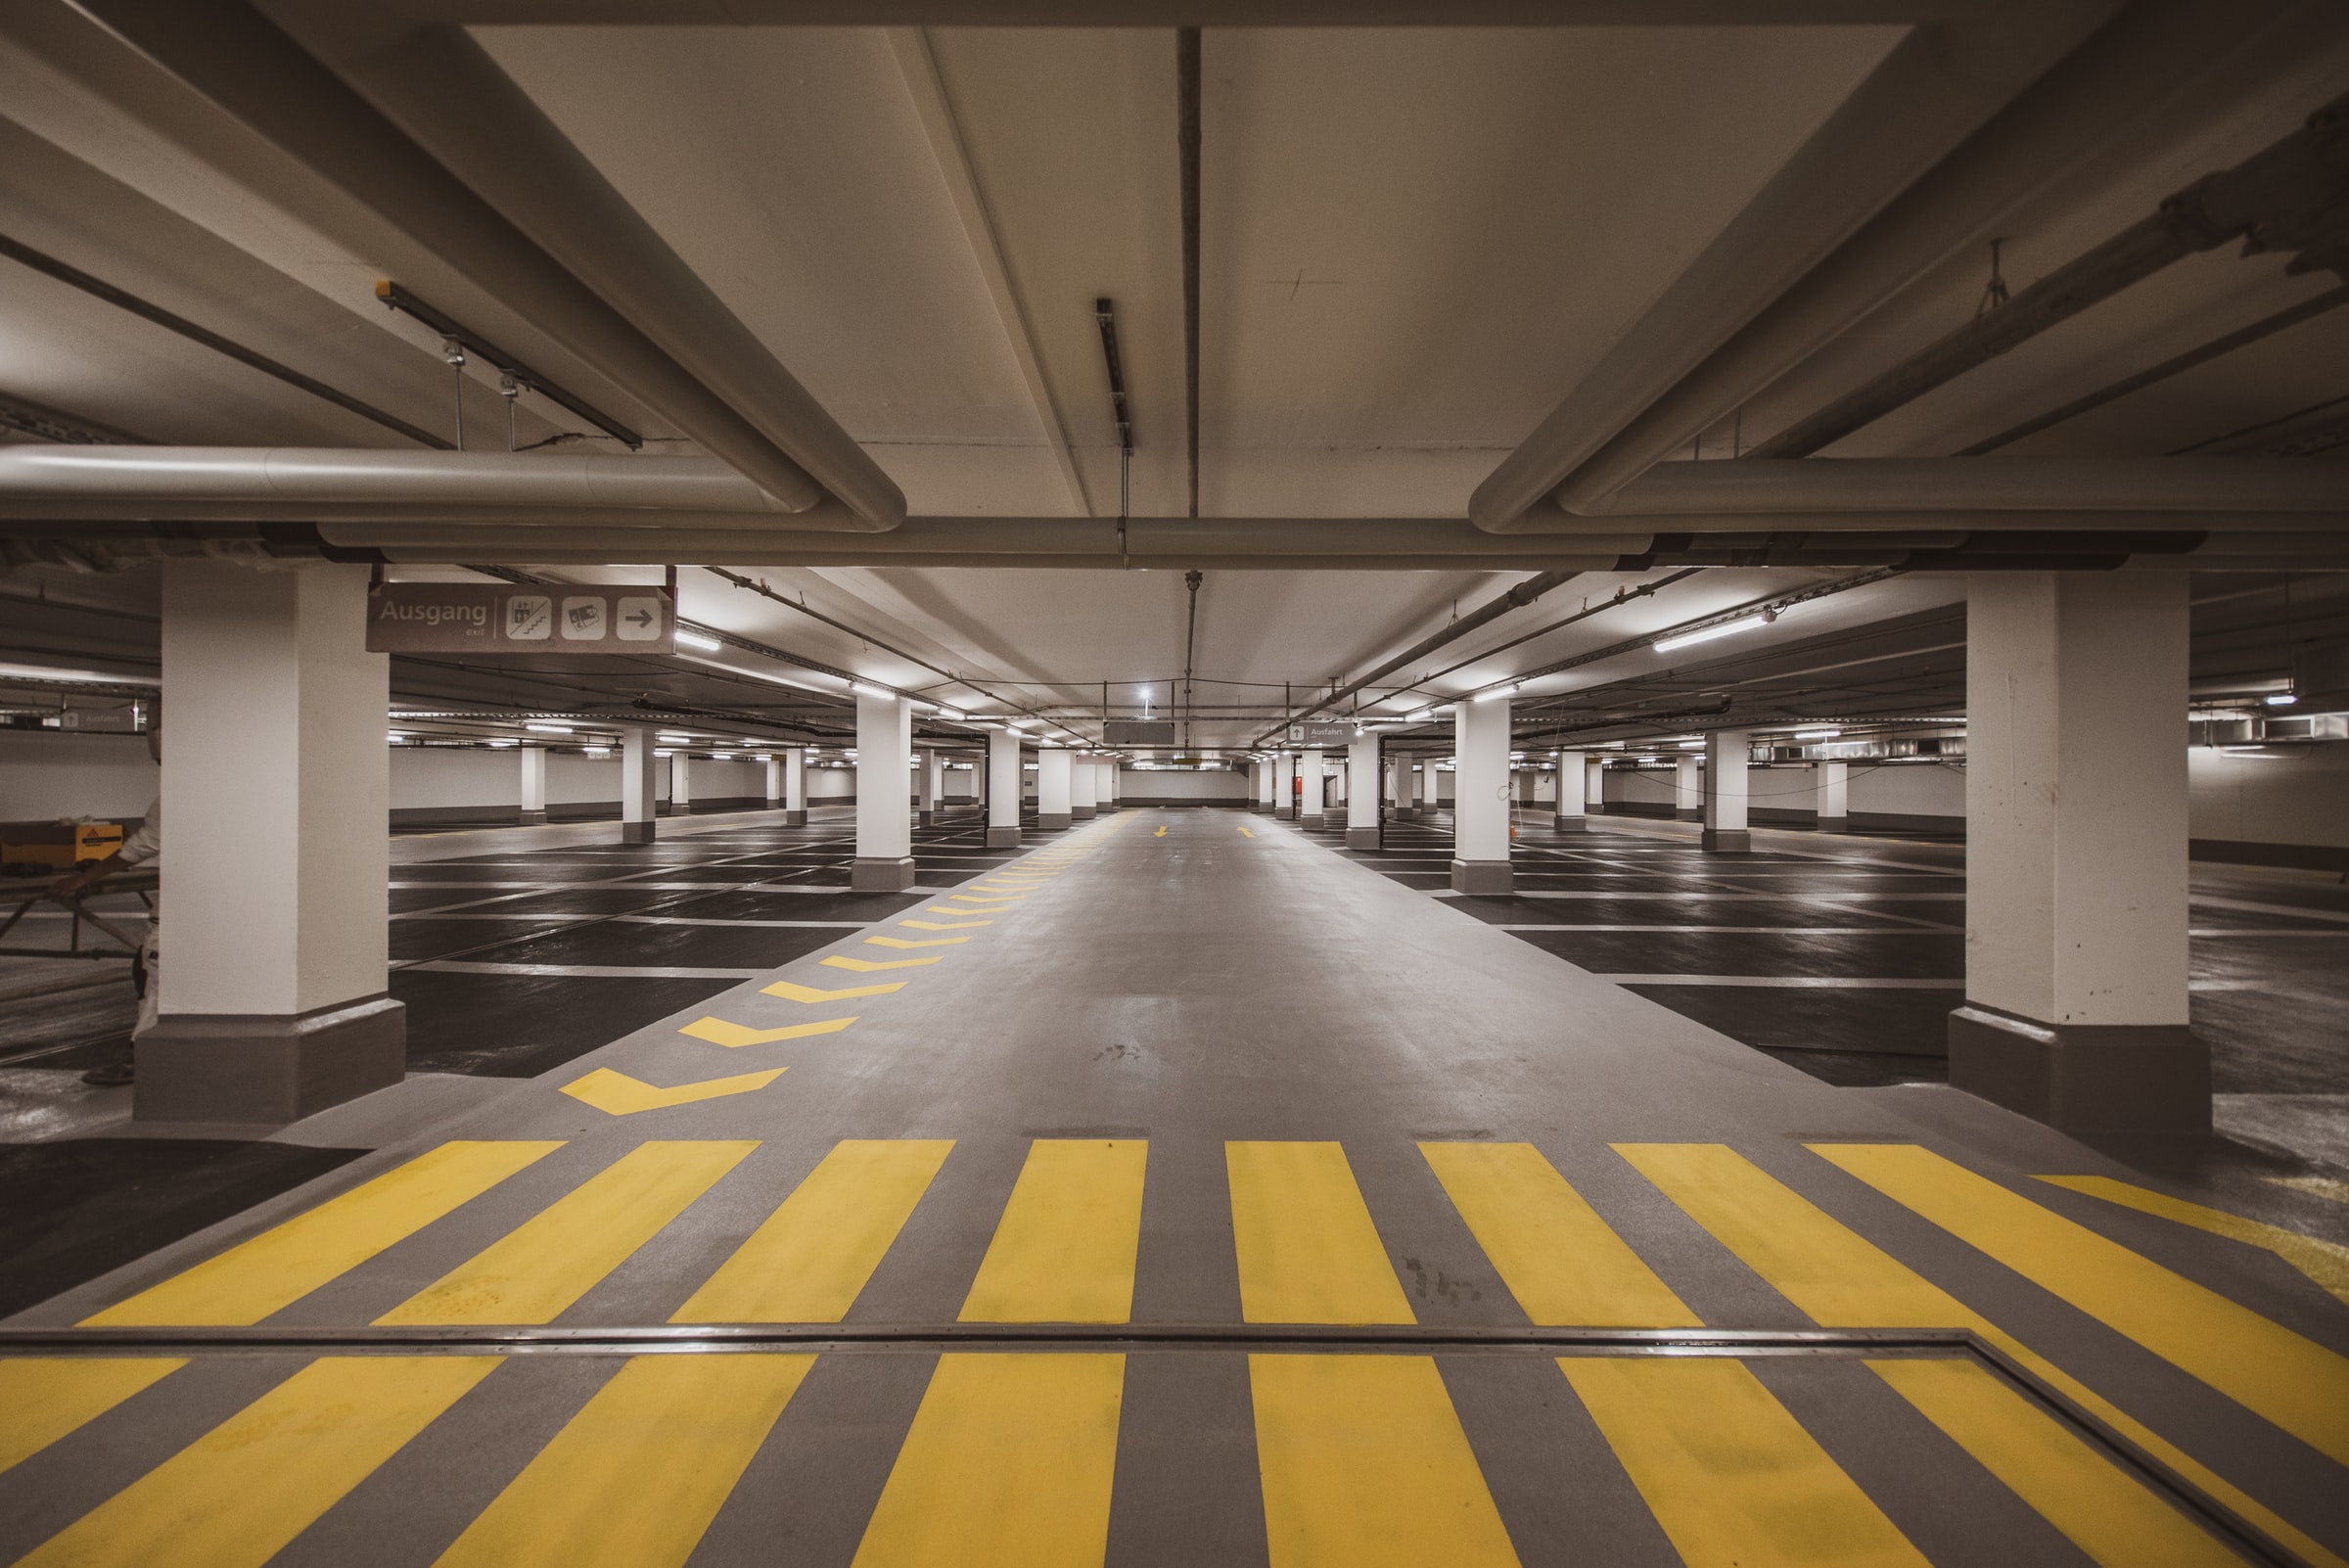 Rental Property In France: Who Is Responsible For Cleaning And Maintaining Parking Lots And Garages?